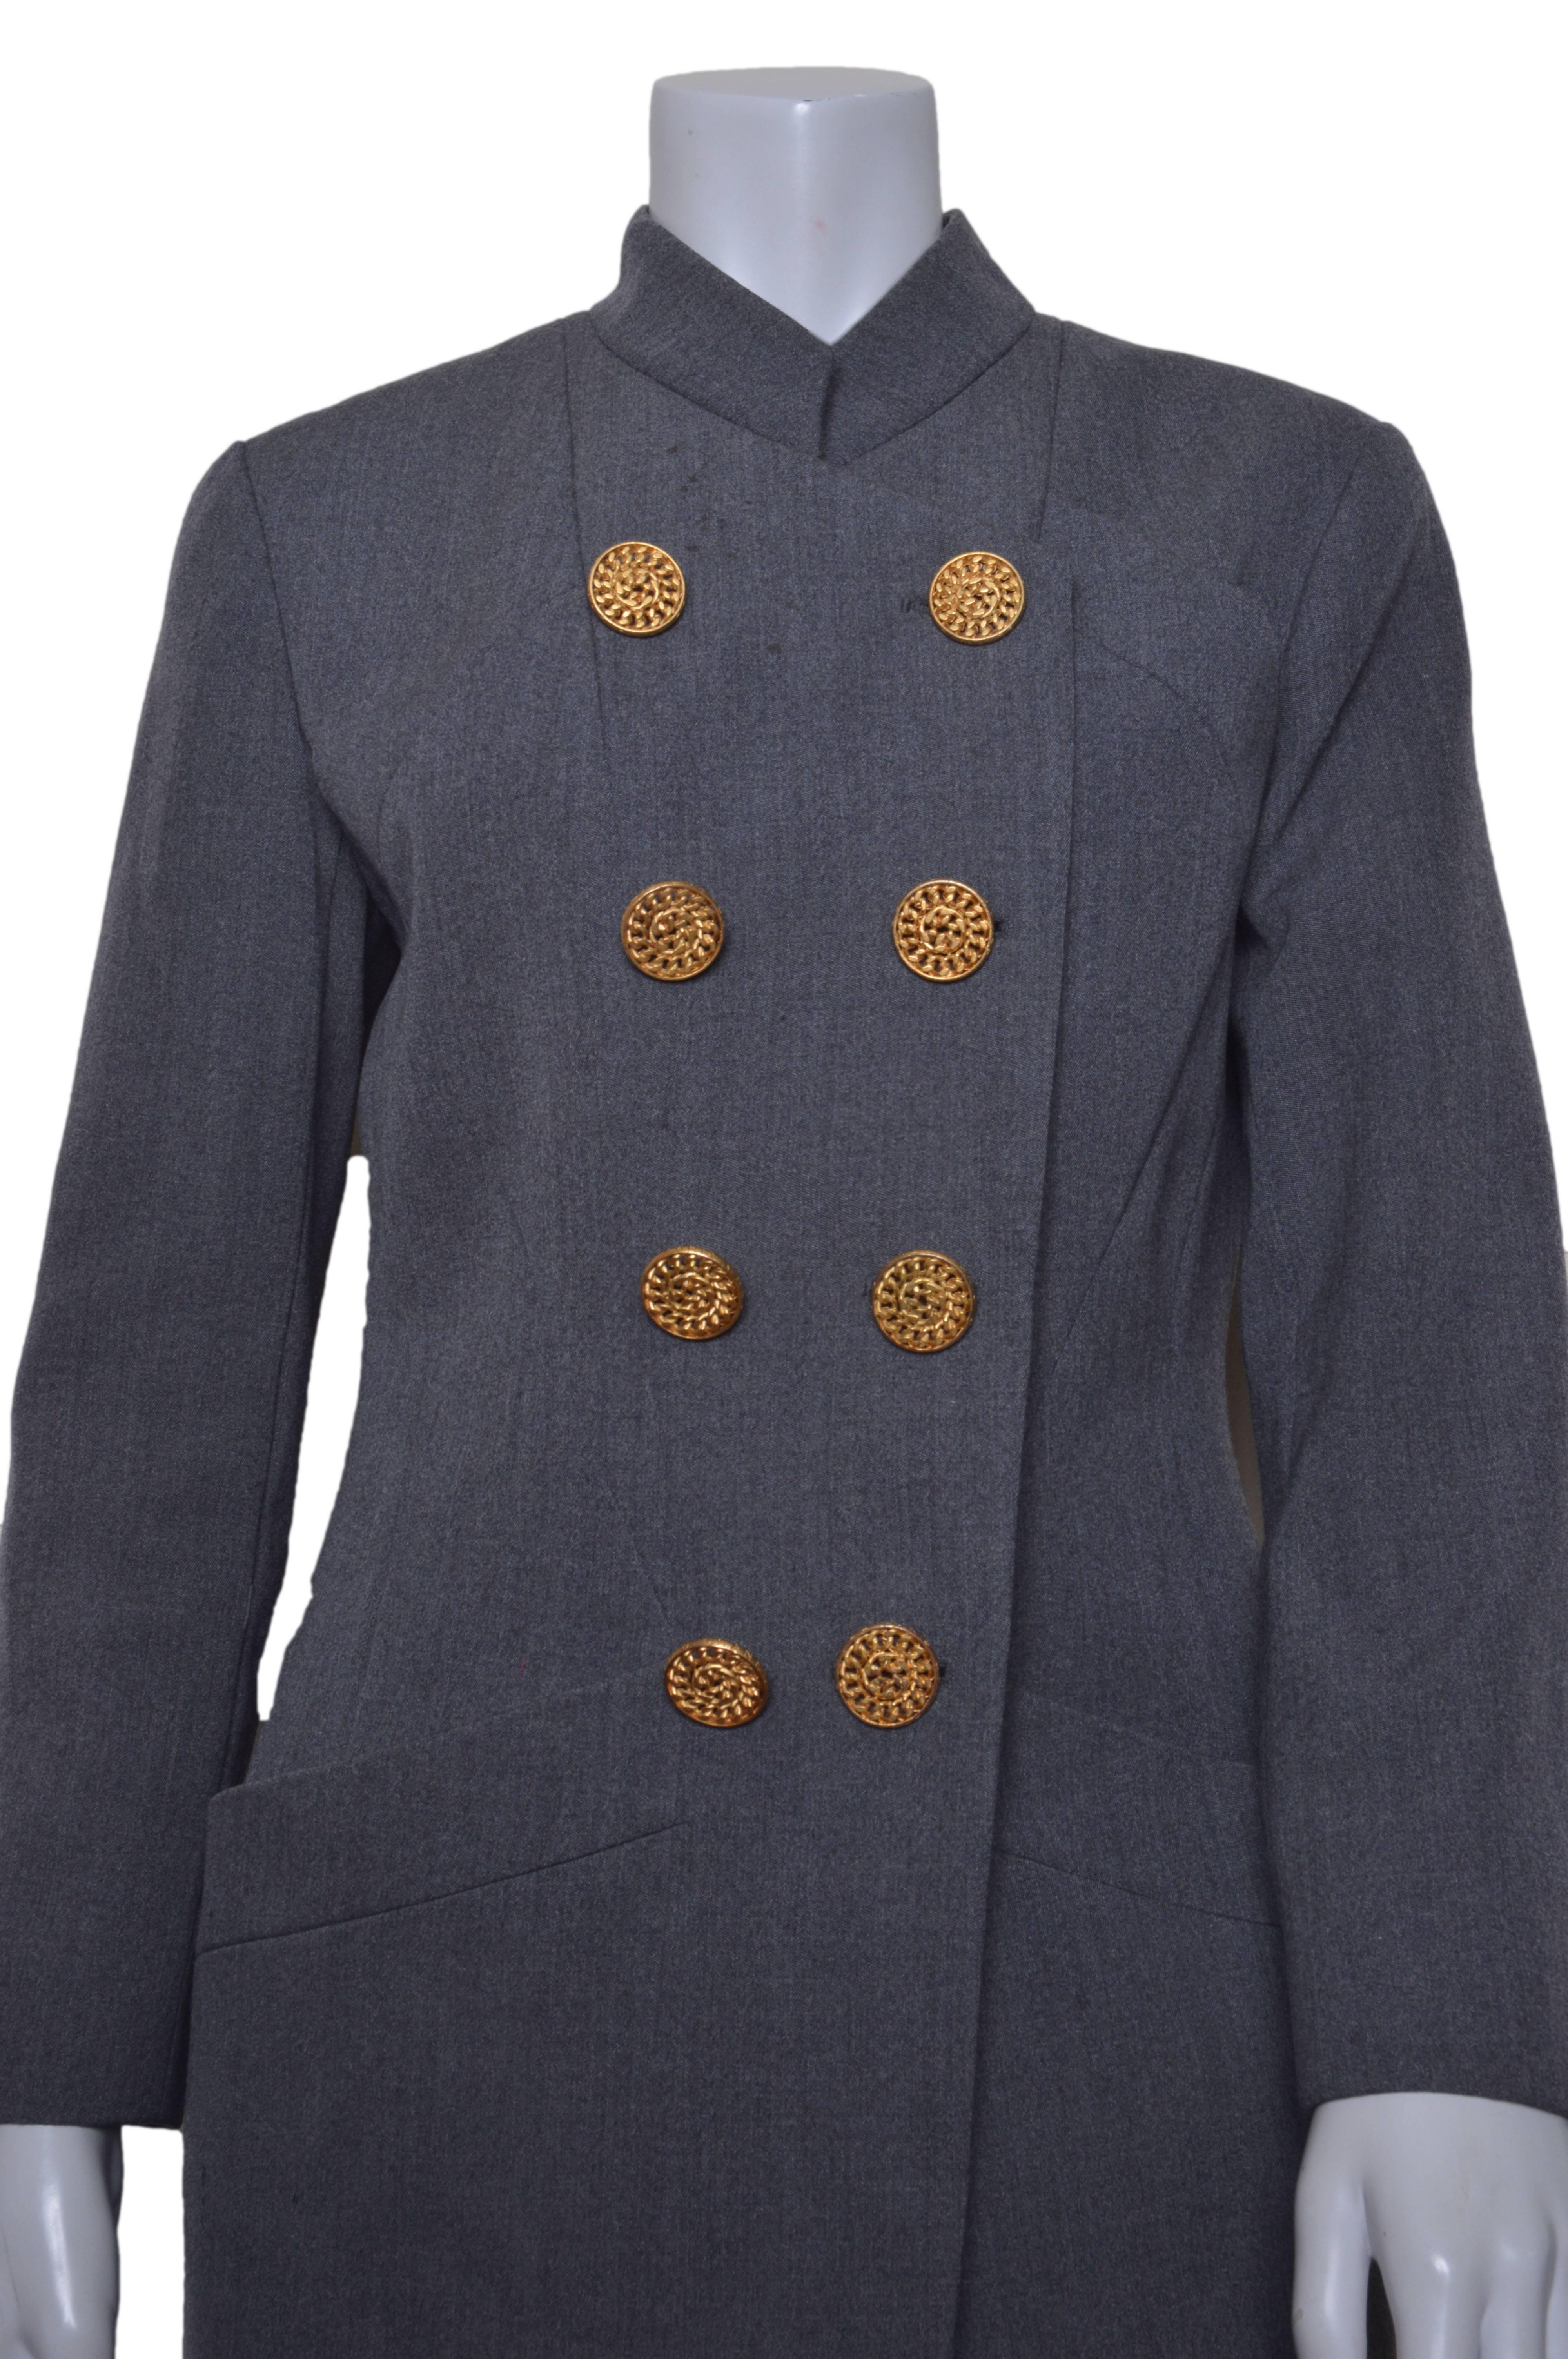 Vintage Chanel Boutique gray wool suit. 
As stated on handwritten tag:
Collection: 29
Style: 20634

Double breasted jacket features oversized gold buttons.
Three button cuff detail.
Slanted chest pockets.
Large bucket pockets on hip.
The